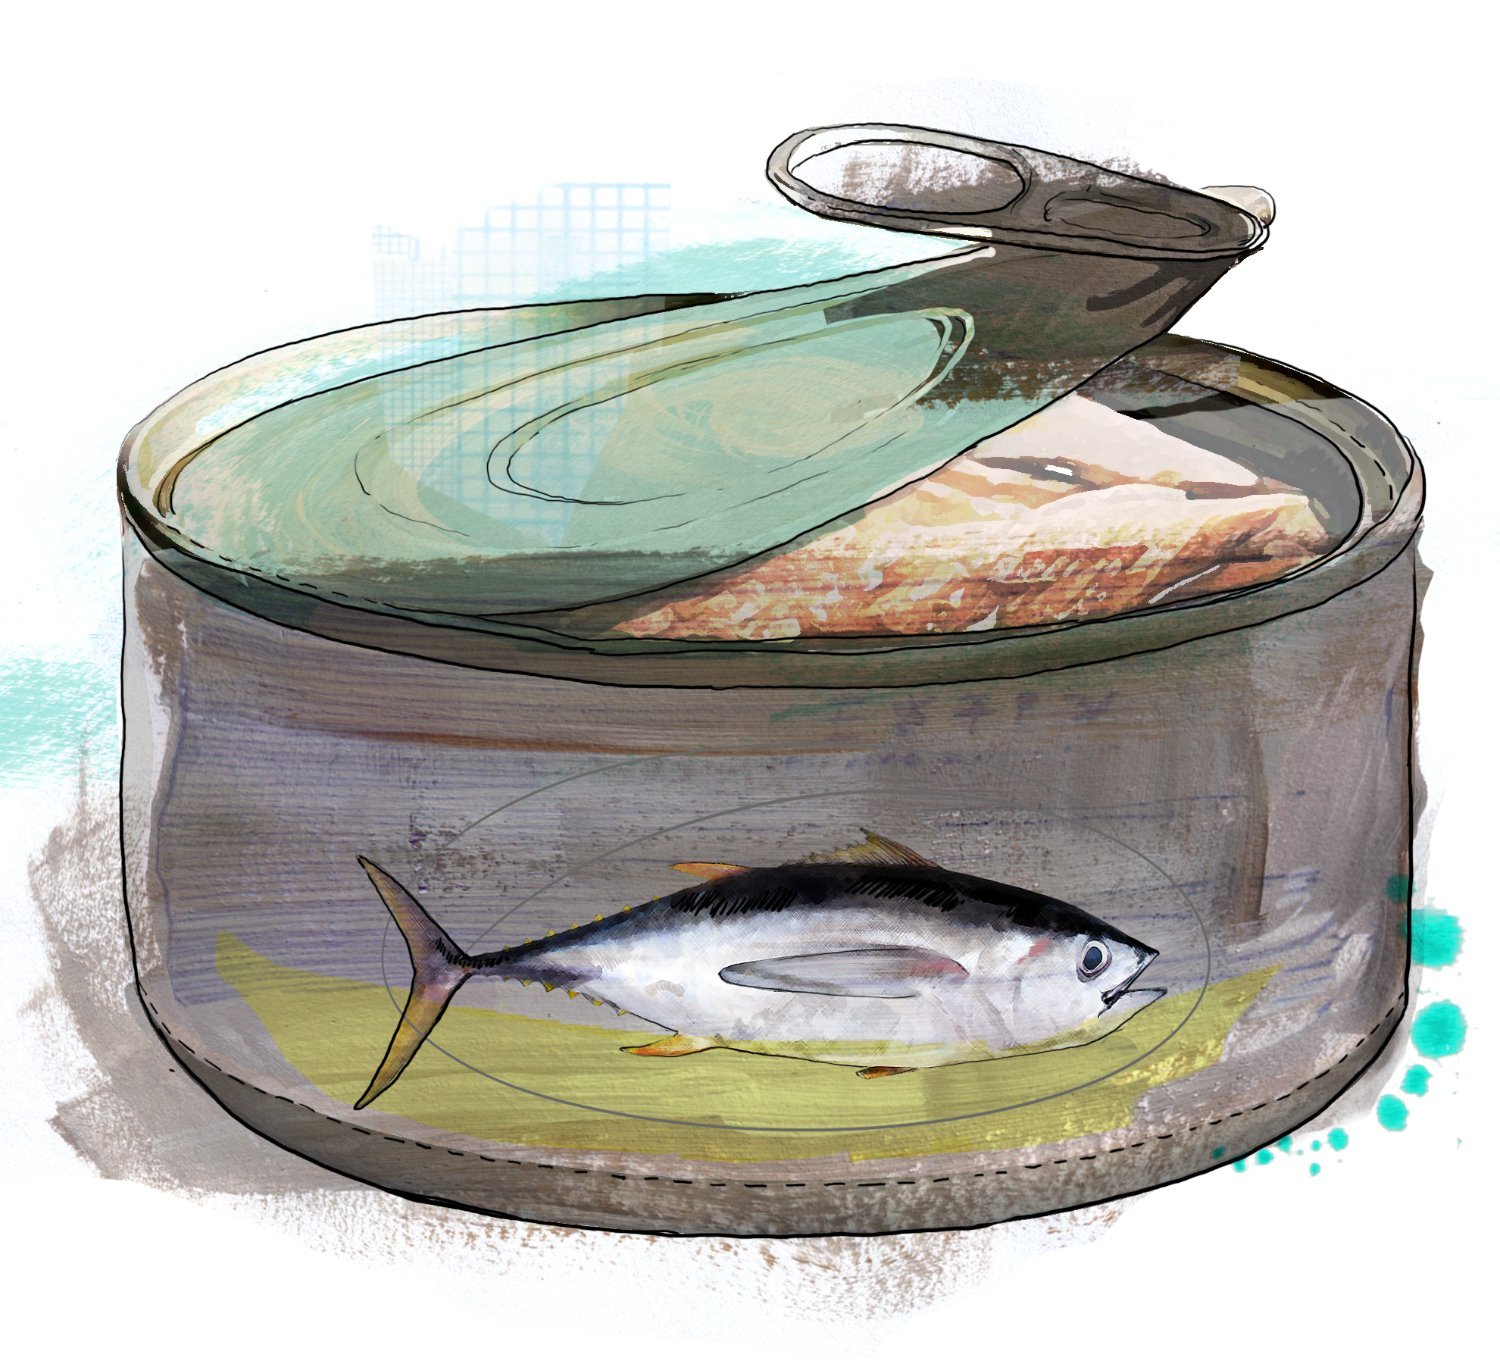 an illustration depicting a tuna can that has been partially pulled open